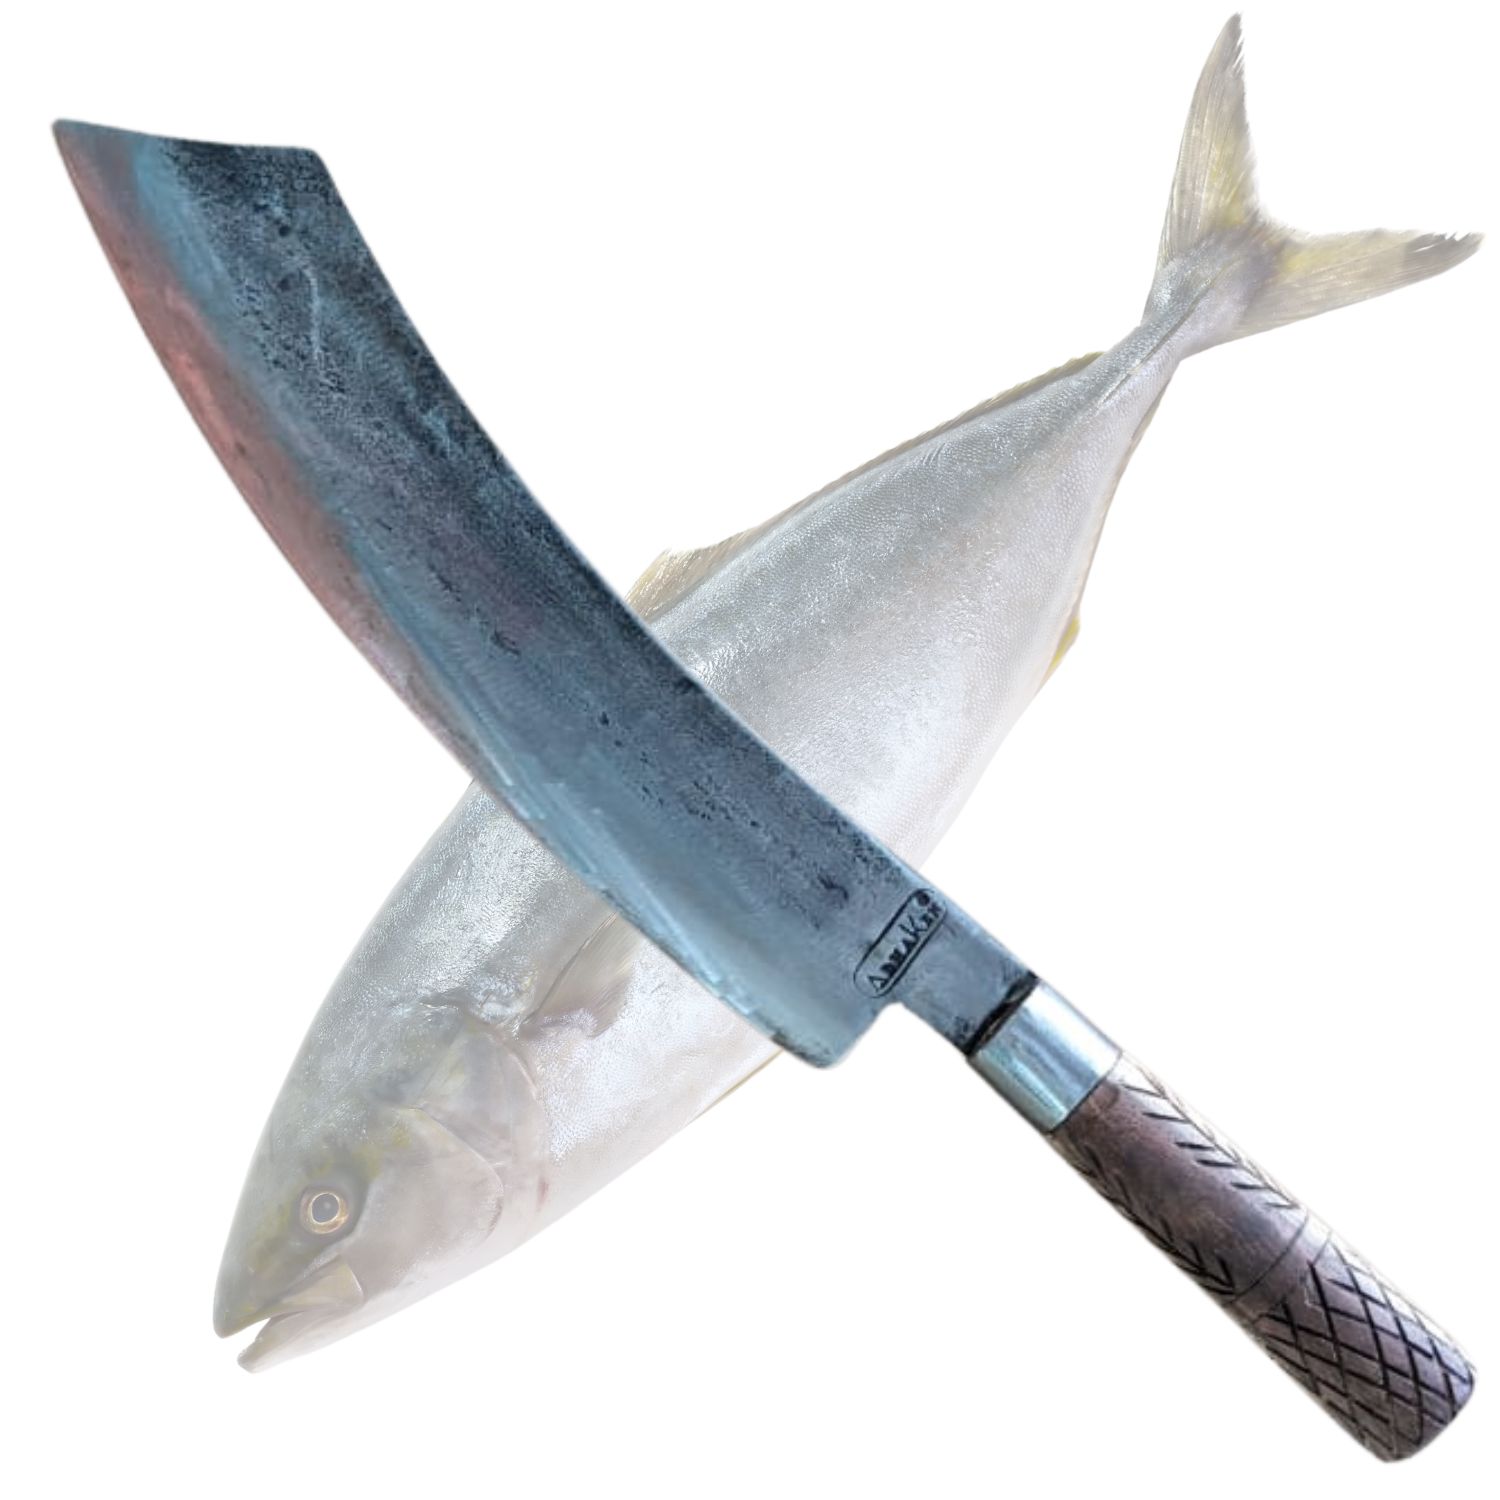 Buy Now Fish Cutting Knife 650gm - Handmade Knives in India - Buy